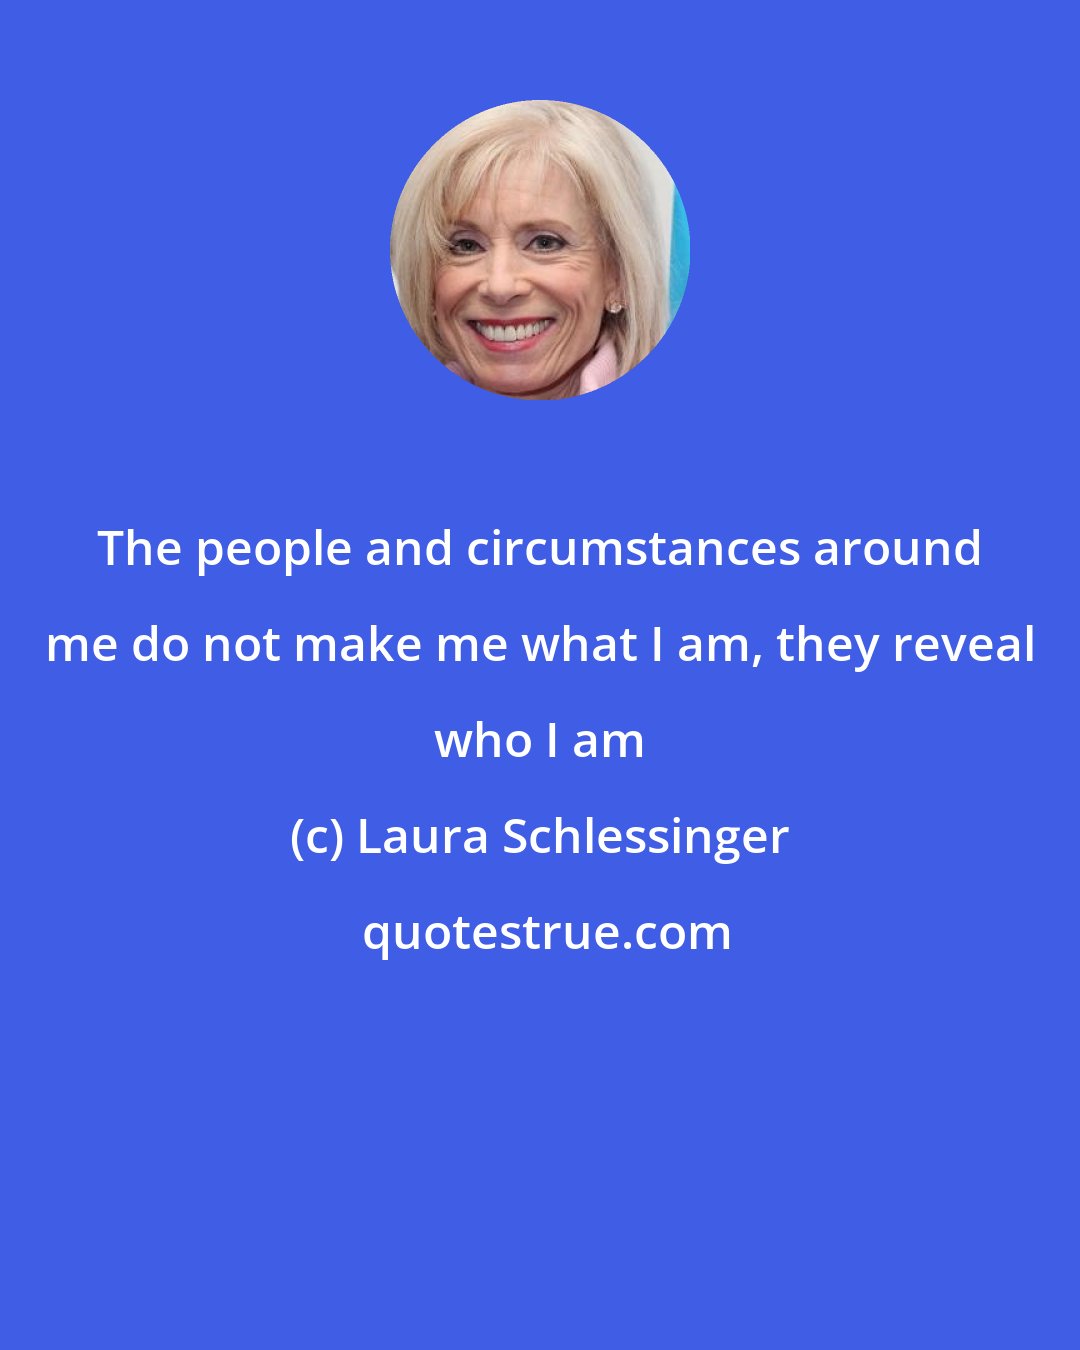 Laura Schlessinger: The people and circumstances around me do not make me what I am, they reveal who I am